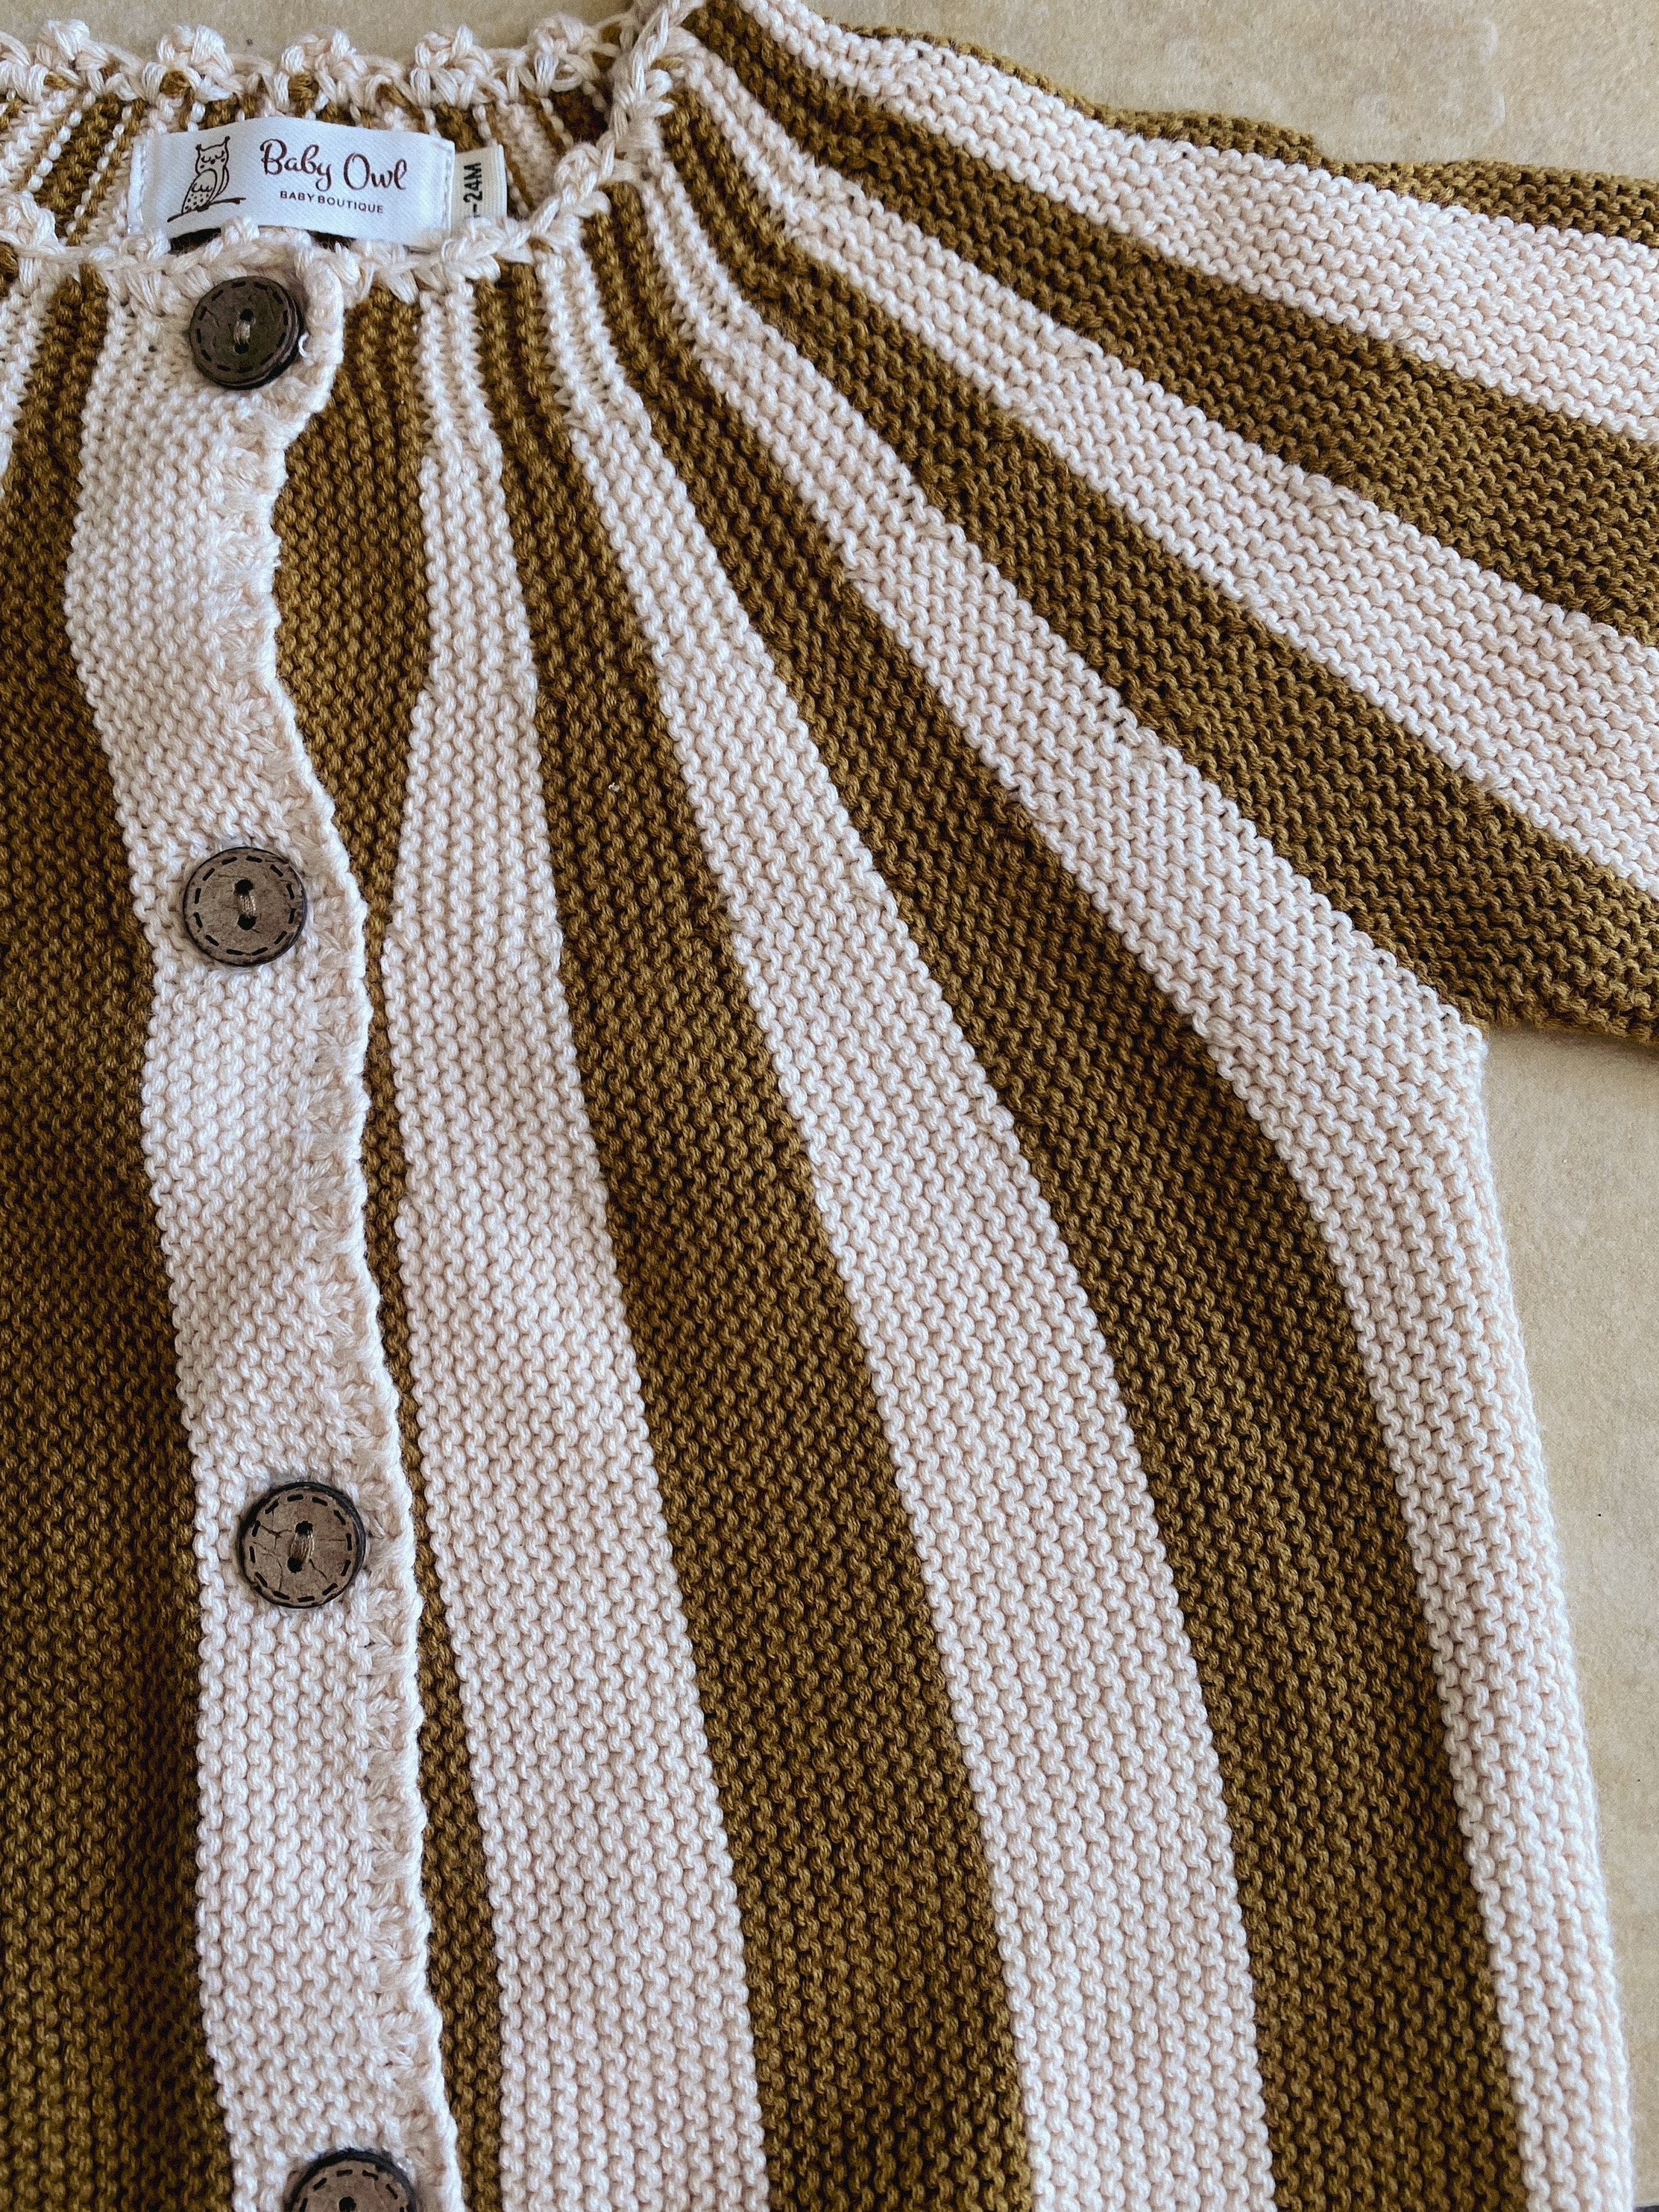 Close up of a knitted girls cardigan. Caramel and beige striped. Wooden buttons at front.